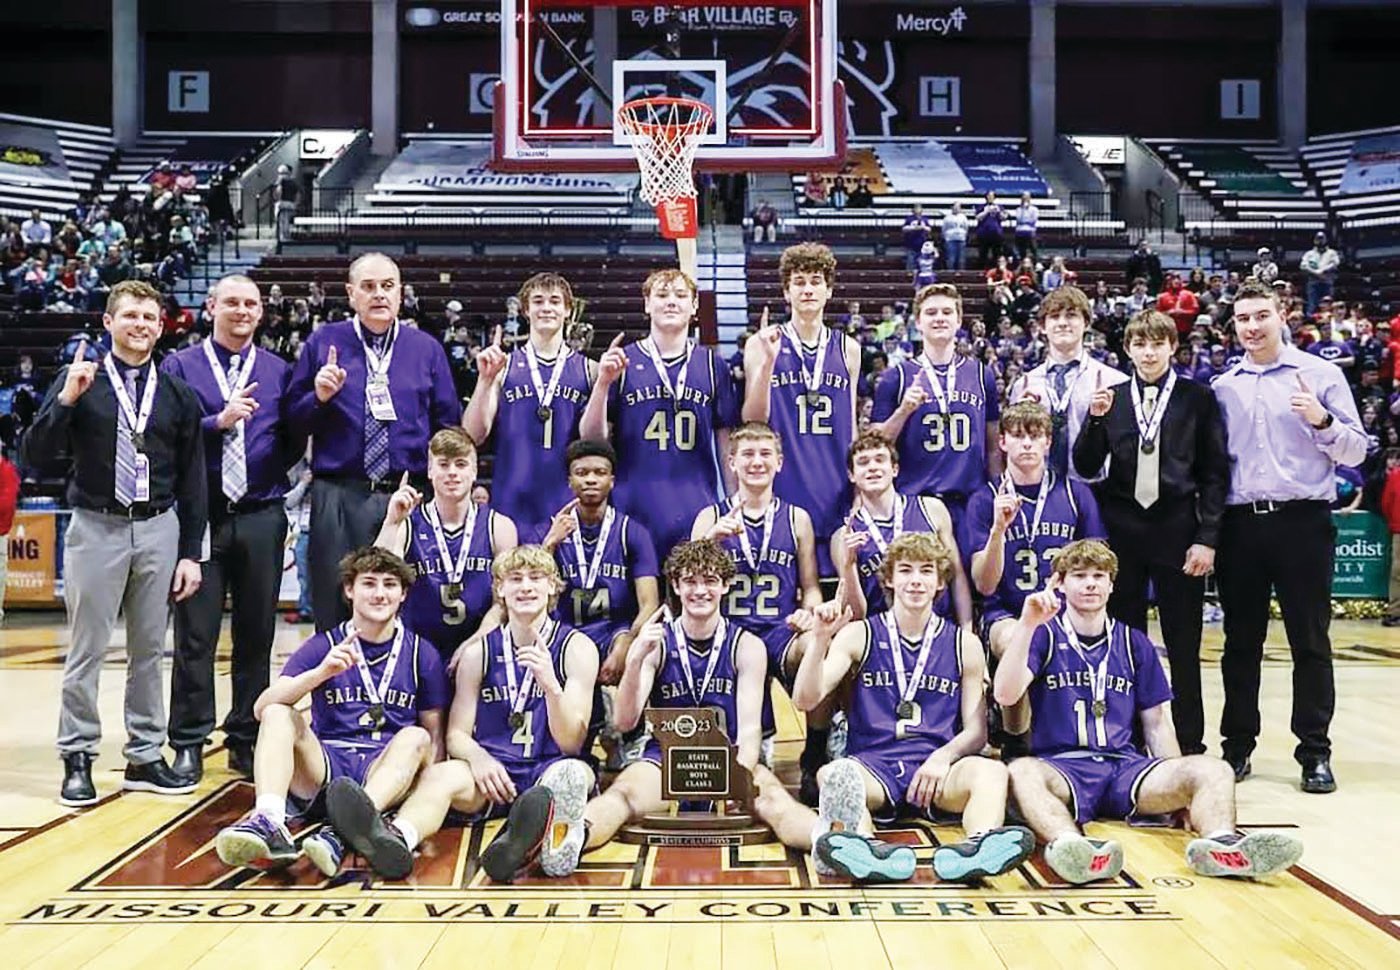 The Salisbury High School boys basketball team gathers for a photo after winning the Class 2 state championship in Springfield on Saturday night.